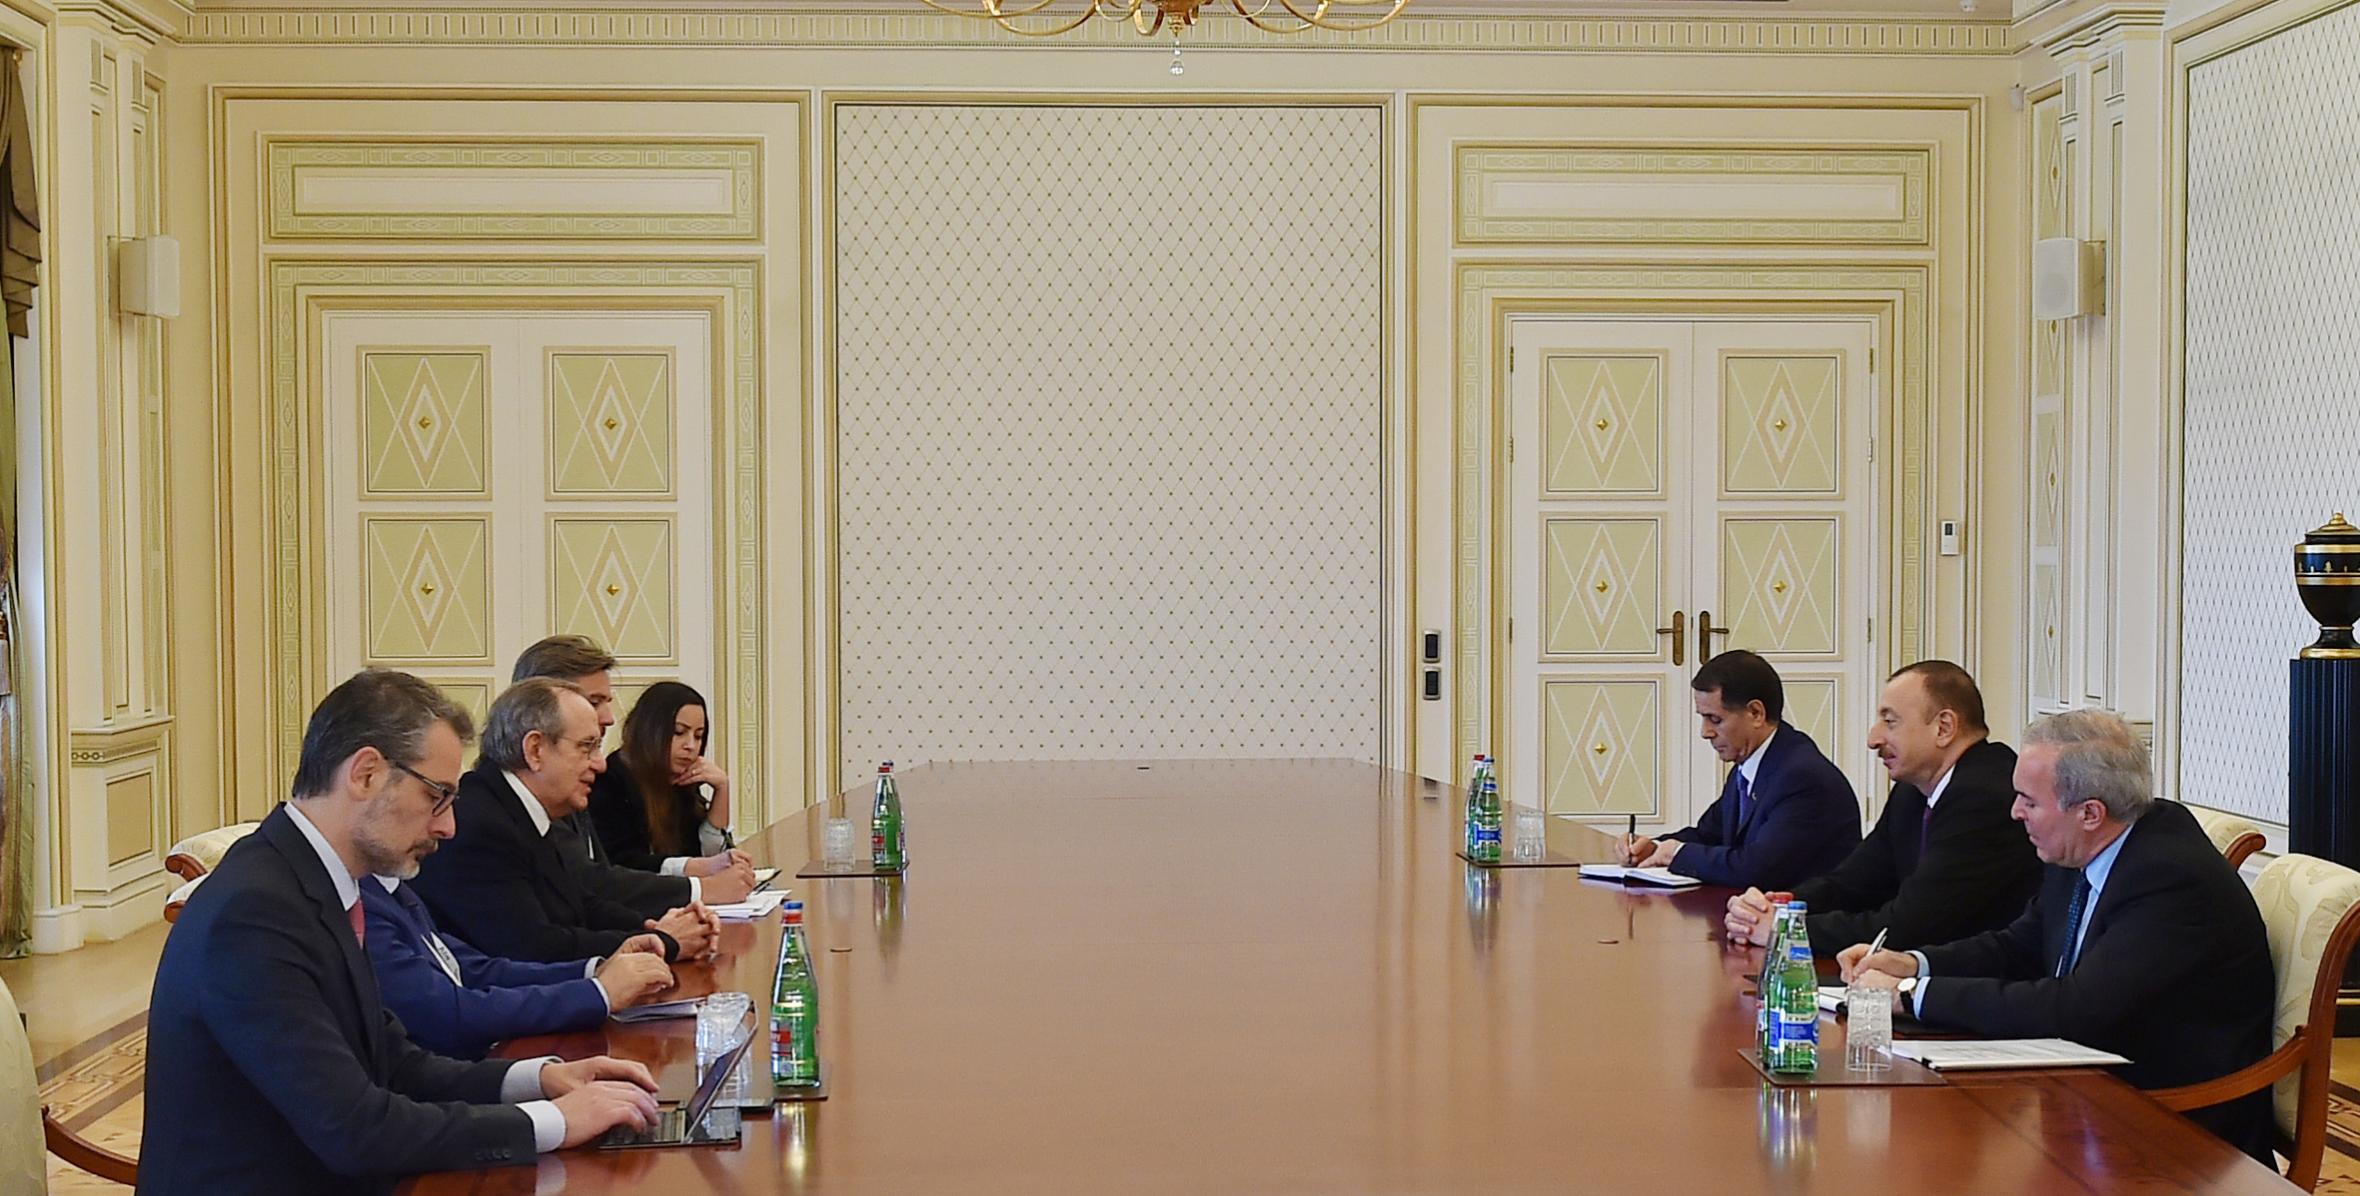 Ilham Aliyev received a delegation led by the Italian Minister of Economy and Finance